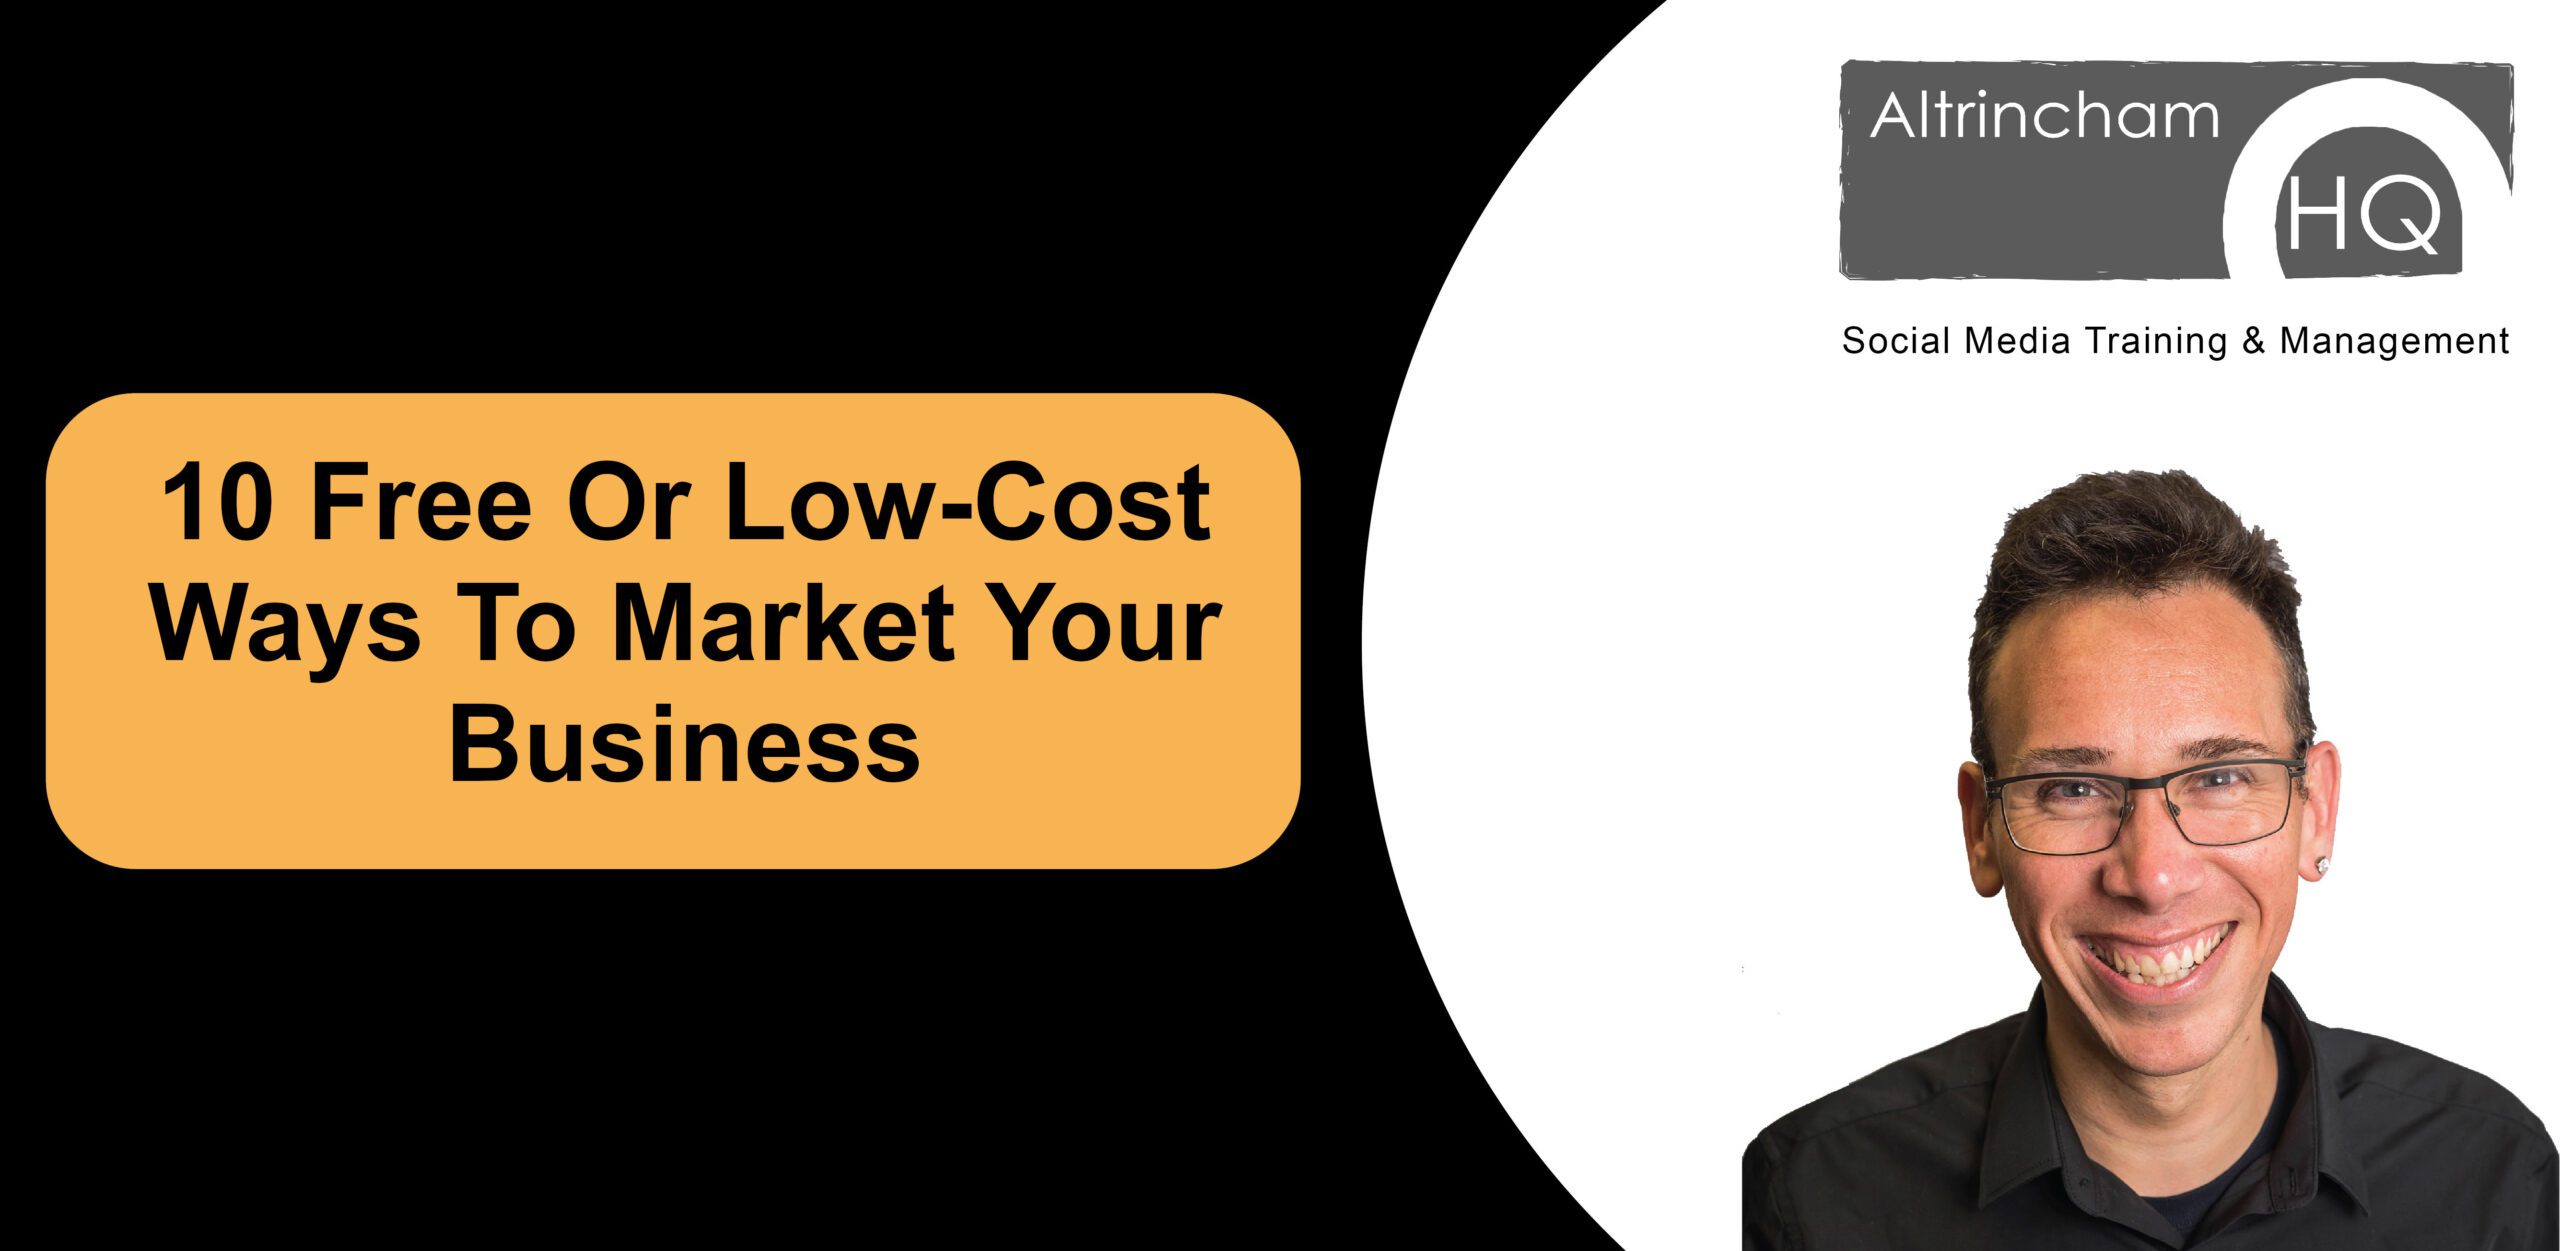 10 Free Or Low-Cost Ways To Market Your Business